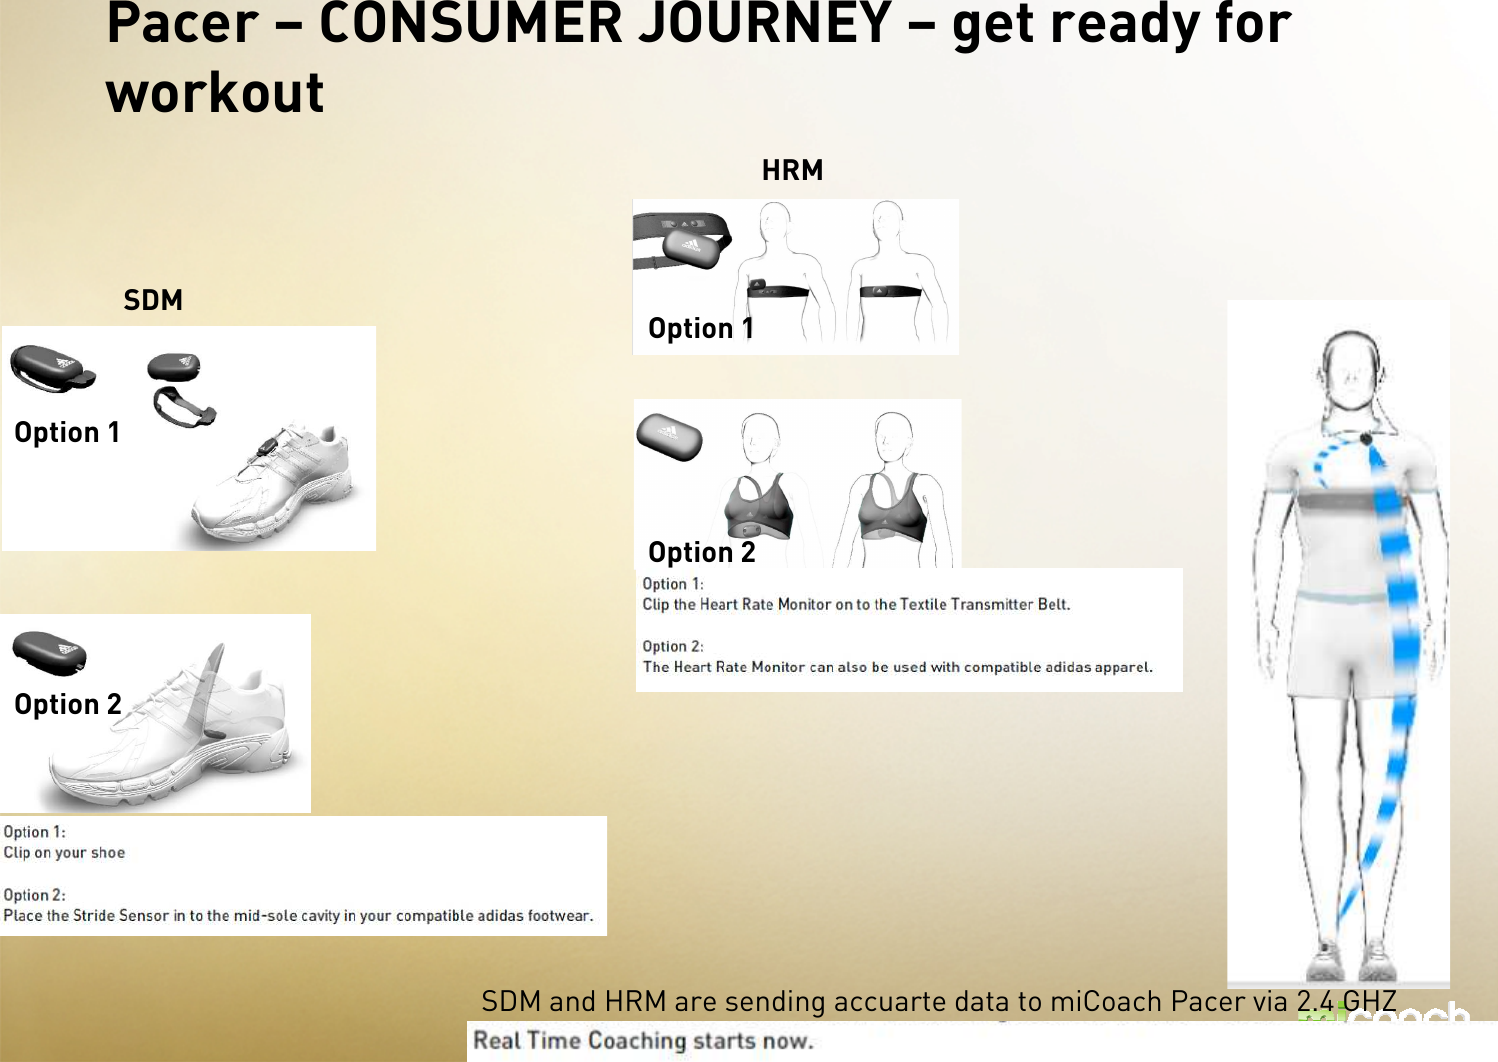 Pacer – CONSUMER JOURNEY – get ready for workoutOption 1Option 2SDMHRMOption 1Option 2SDM and HRM are sending accuarte data to miCoach Pacer via 2.4 GHZ